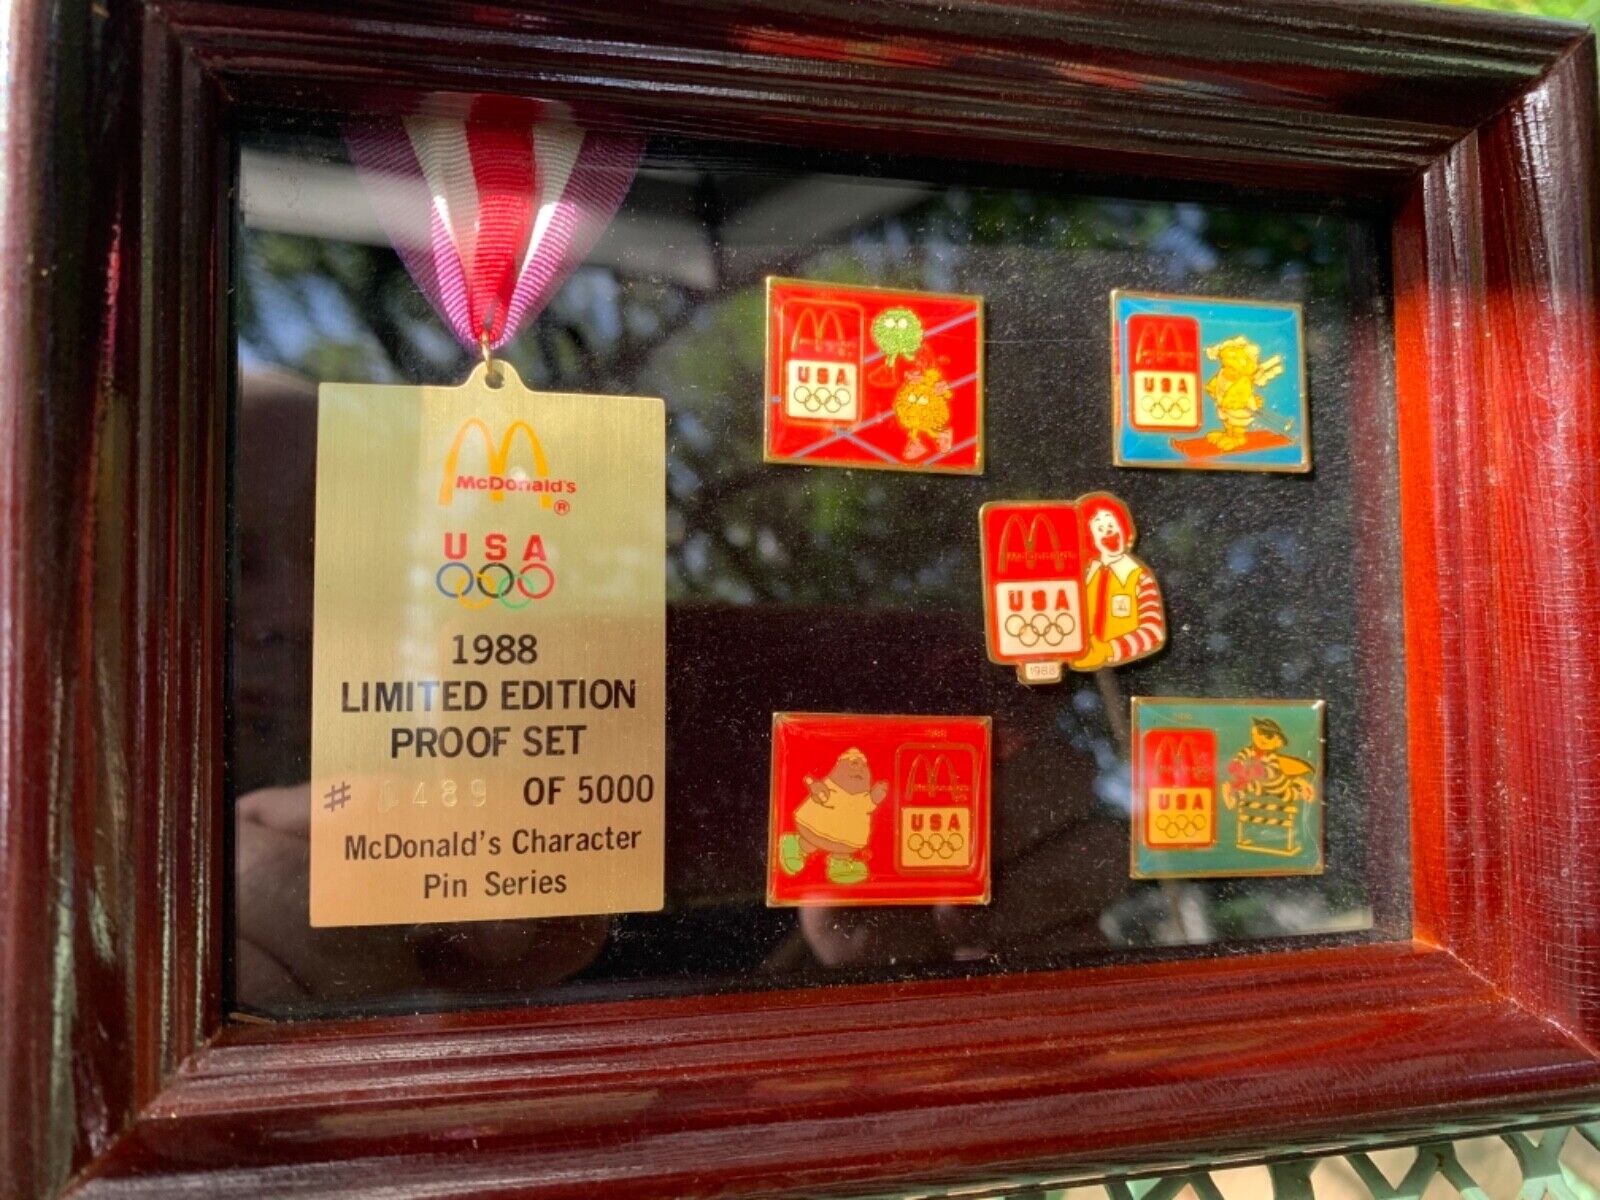 McDonalds Olympics 1988 Limited Edition Proof Set Pins 489 of 5000